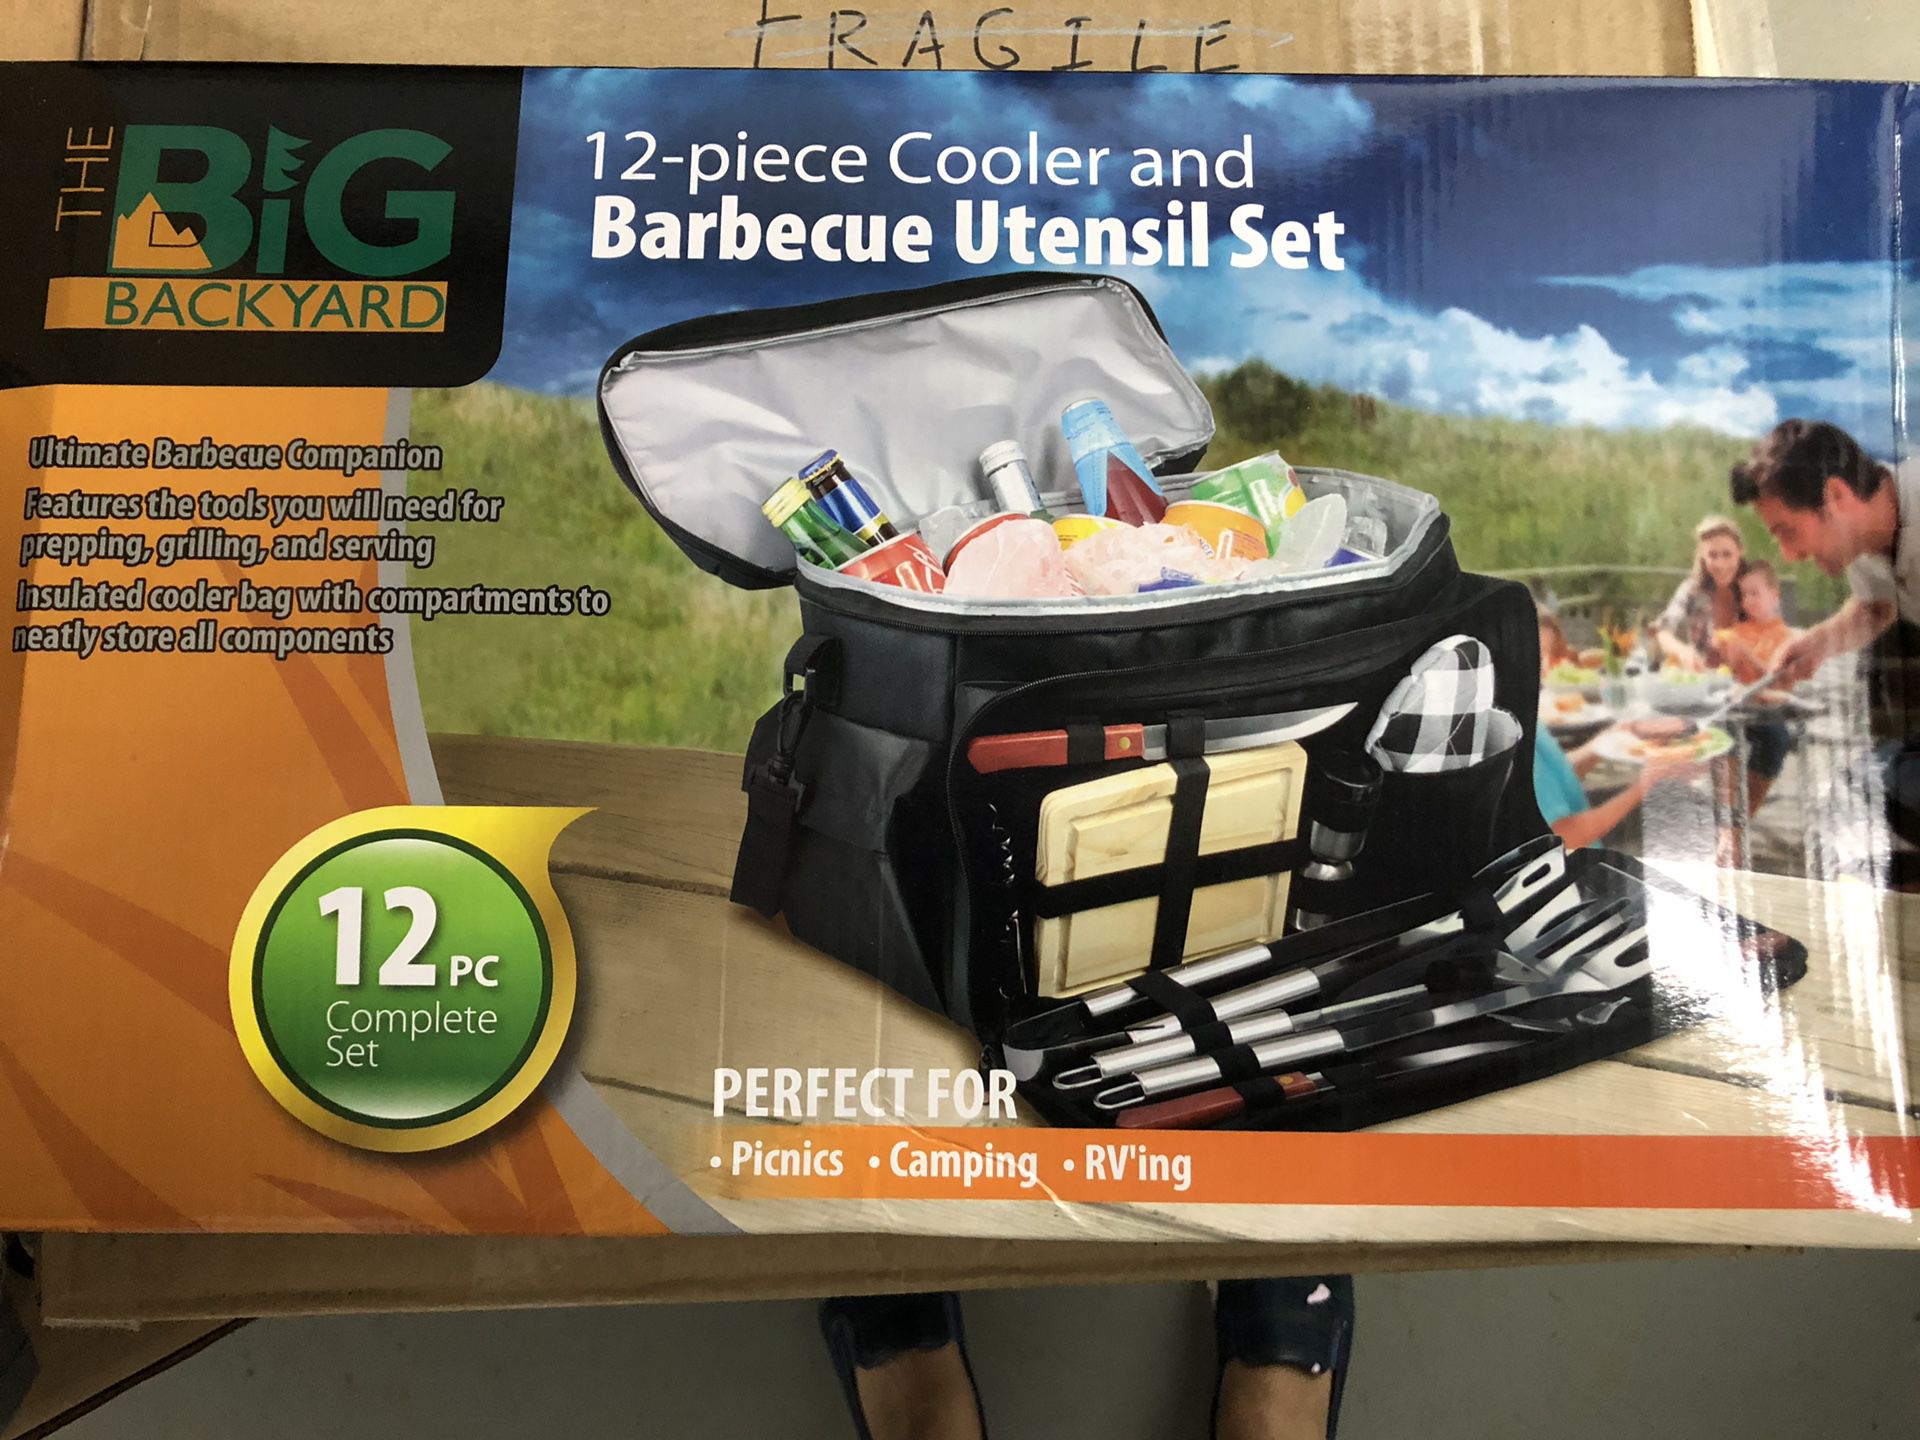 Barbecue cooler and utensil set